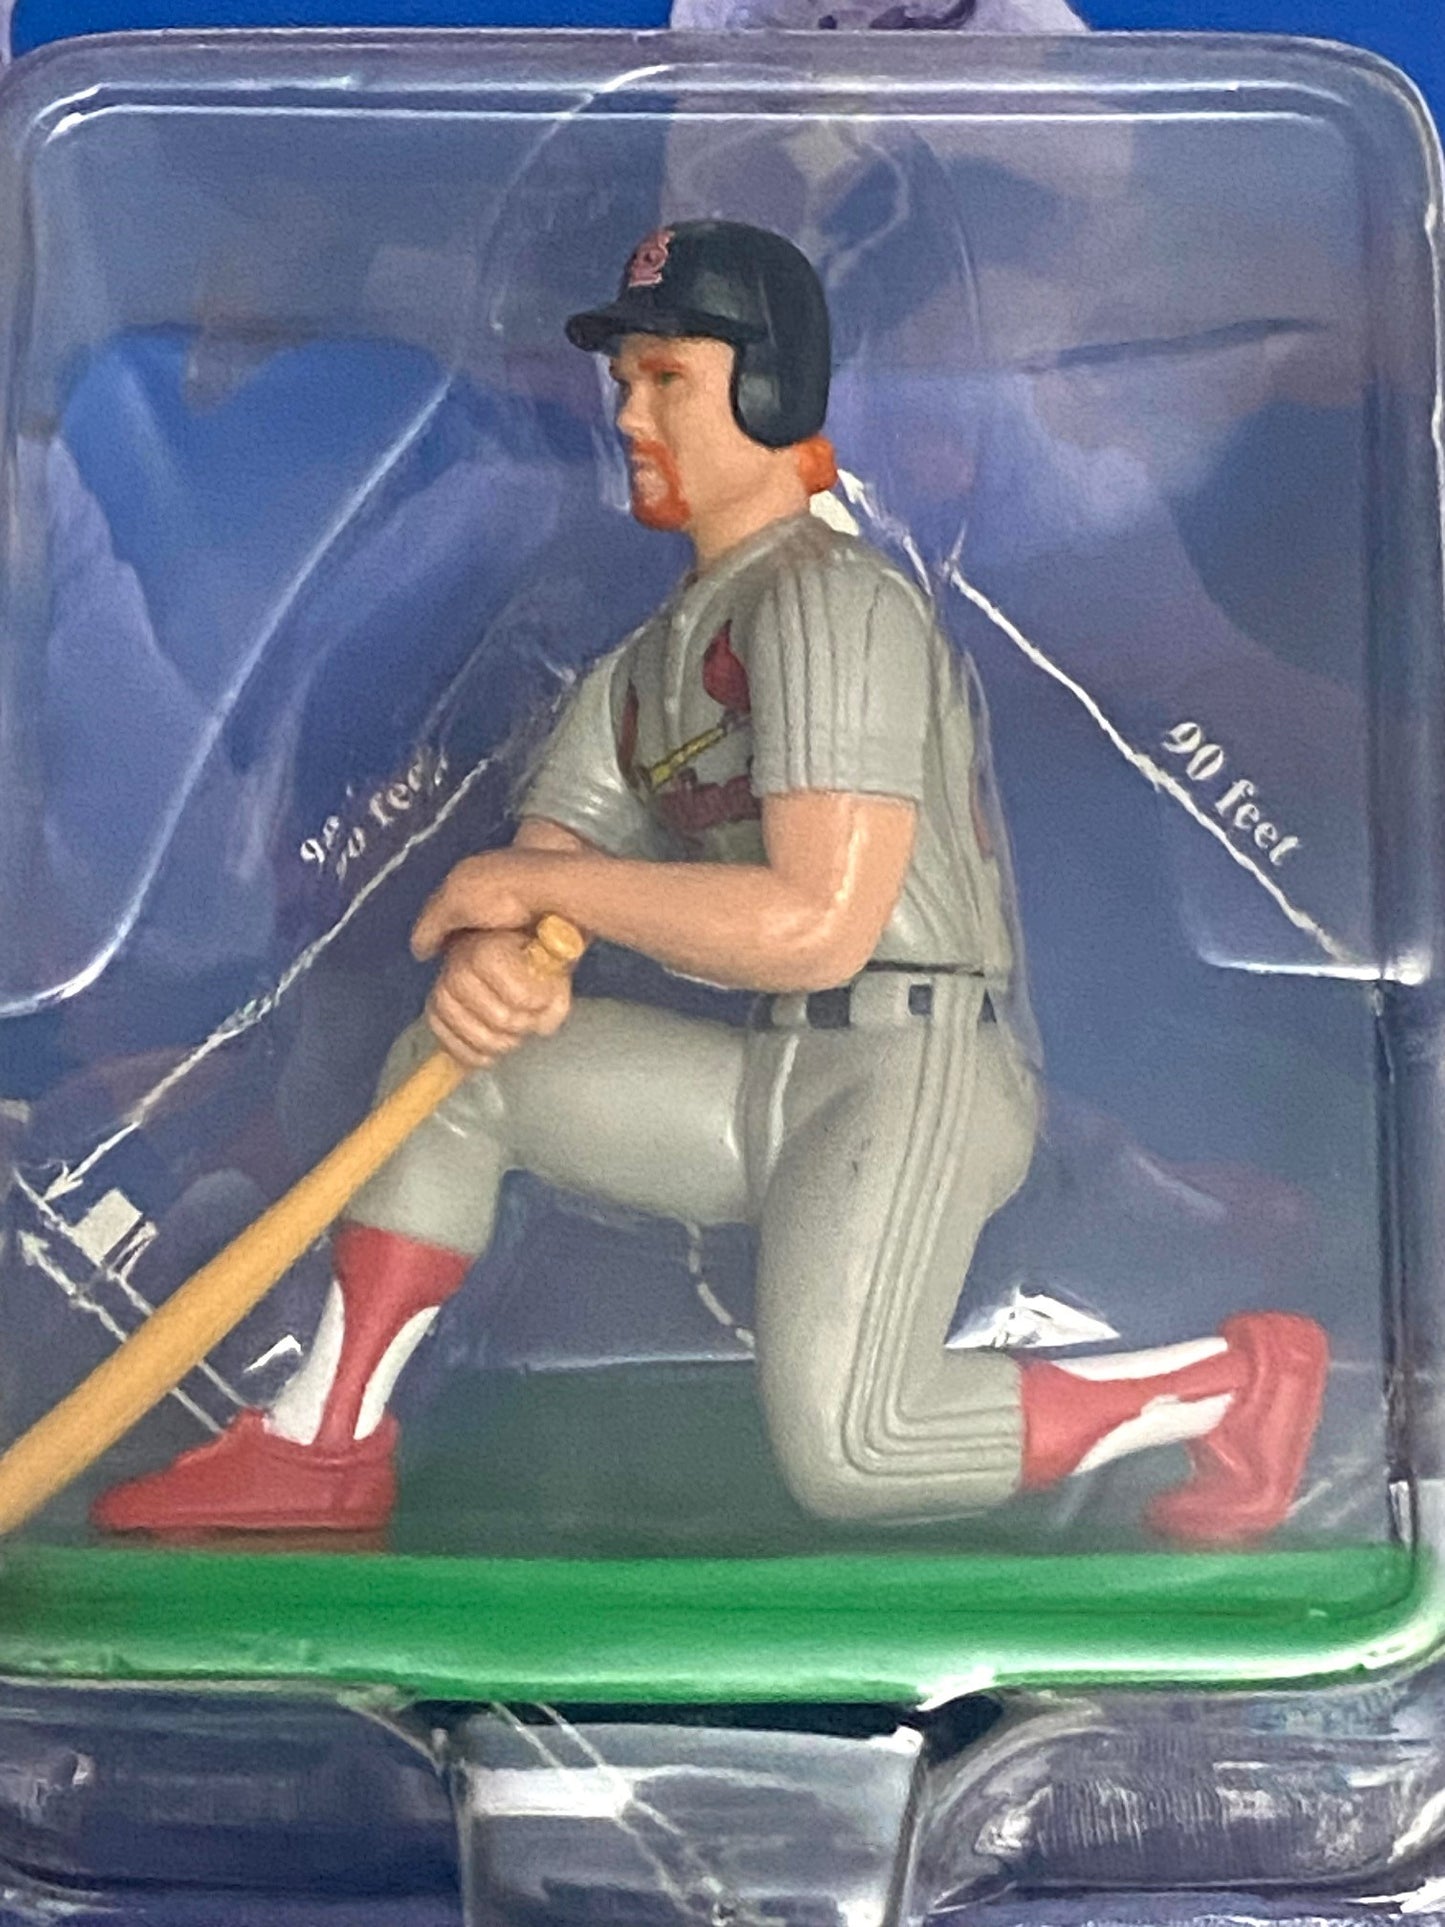 Mark McGwire 1998 St. Louis Cardinals MLB Starting Lineup Figure by Kenner